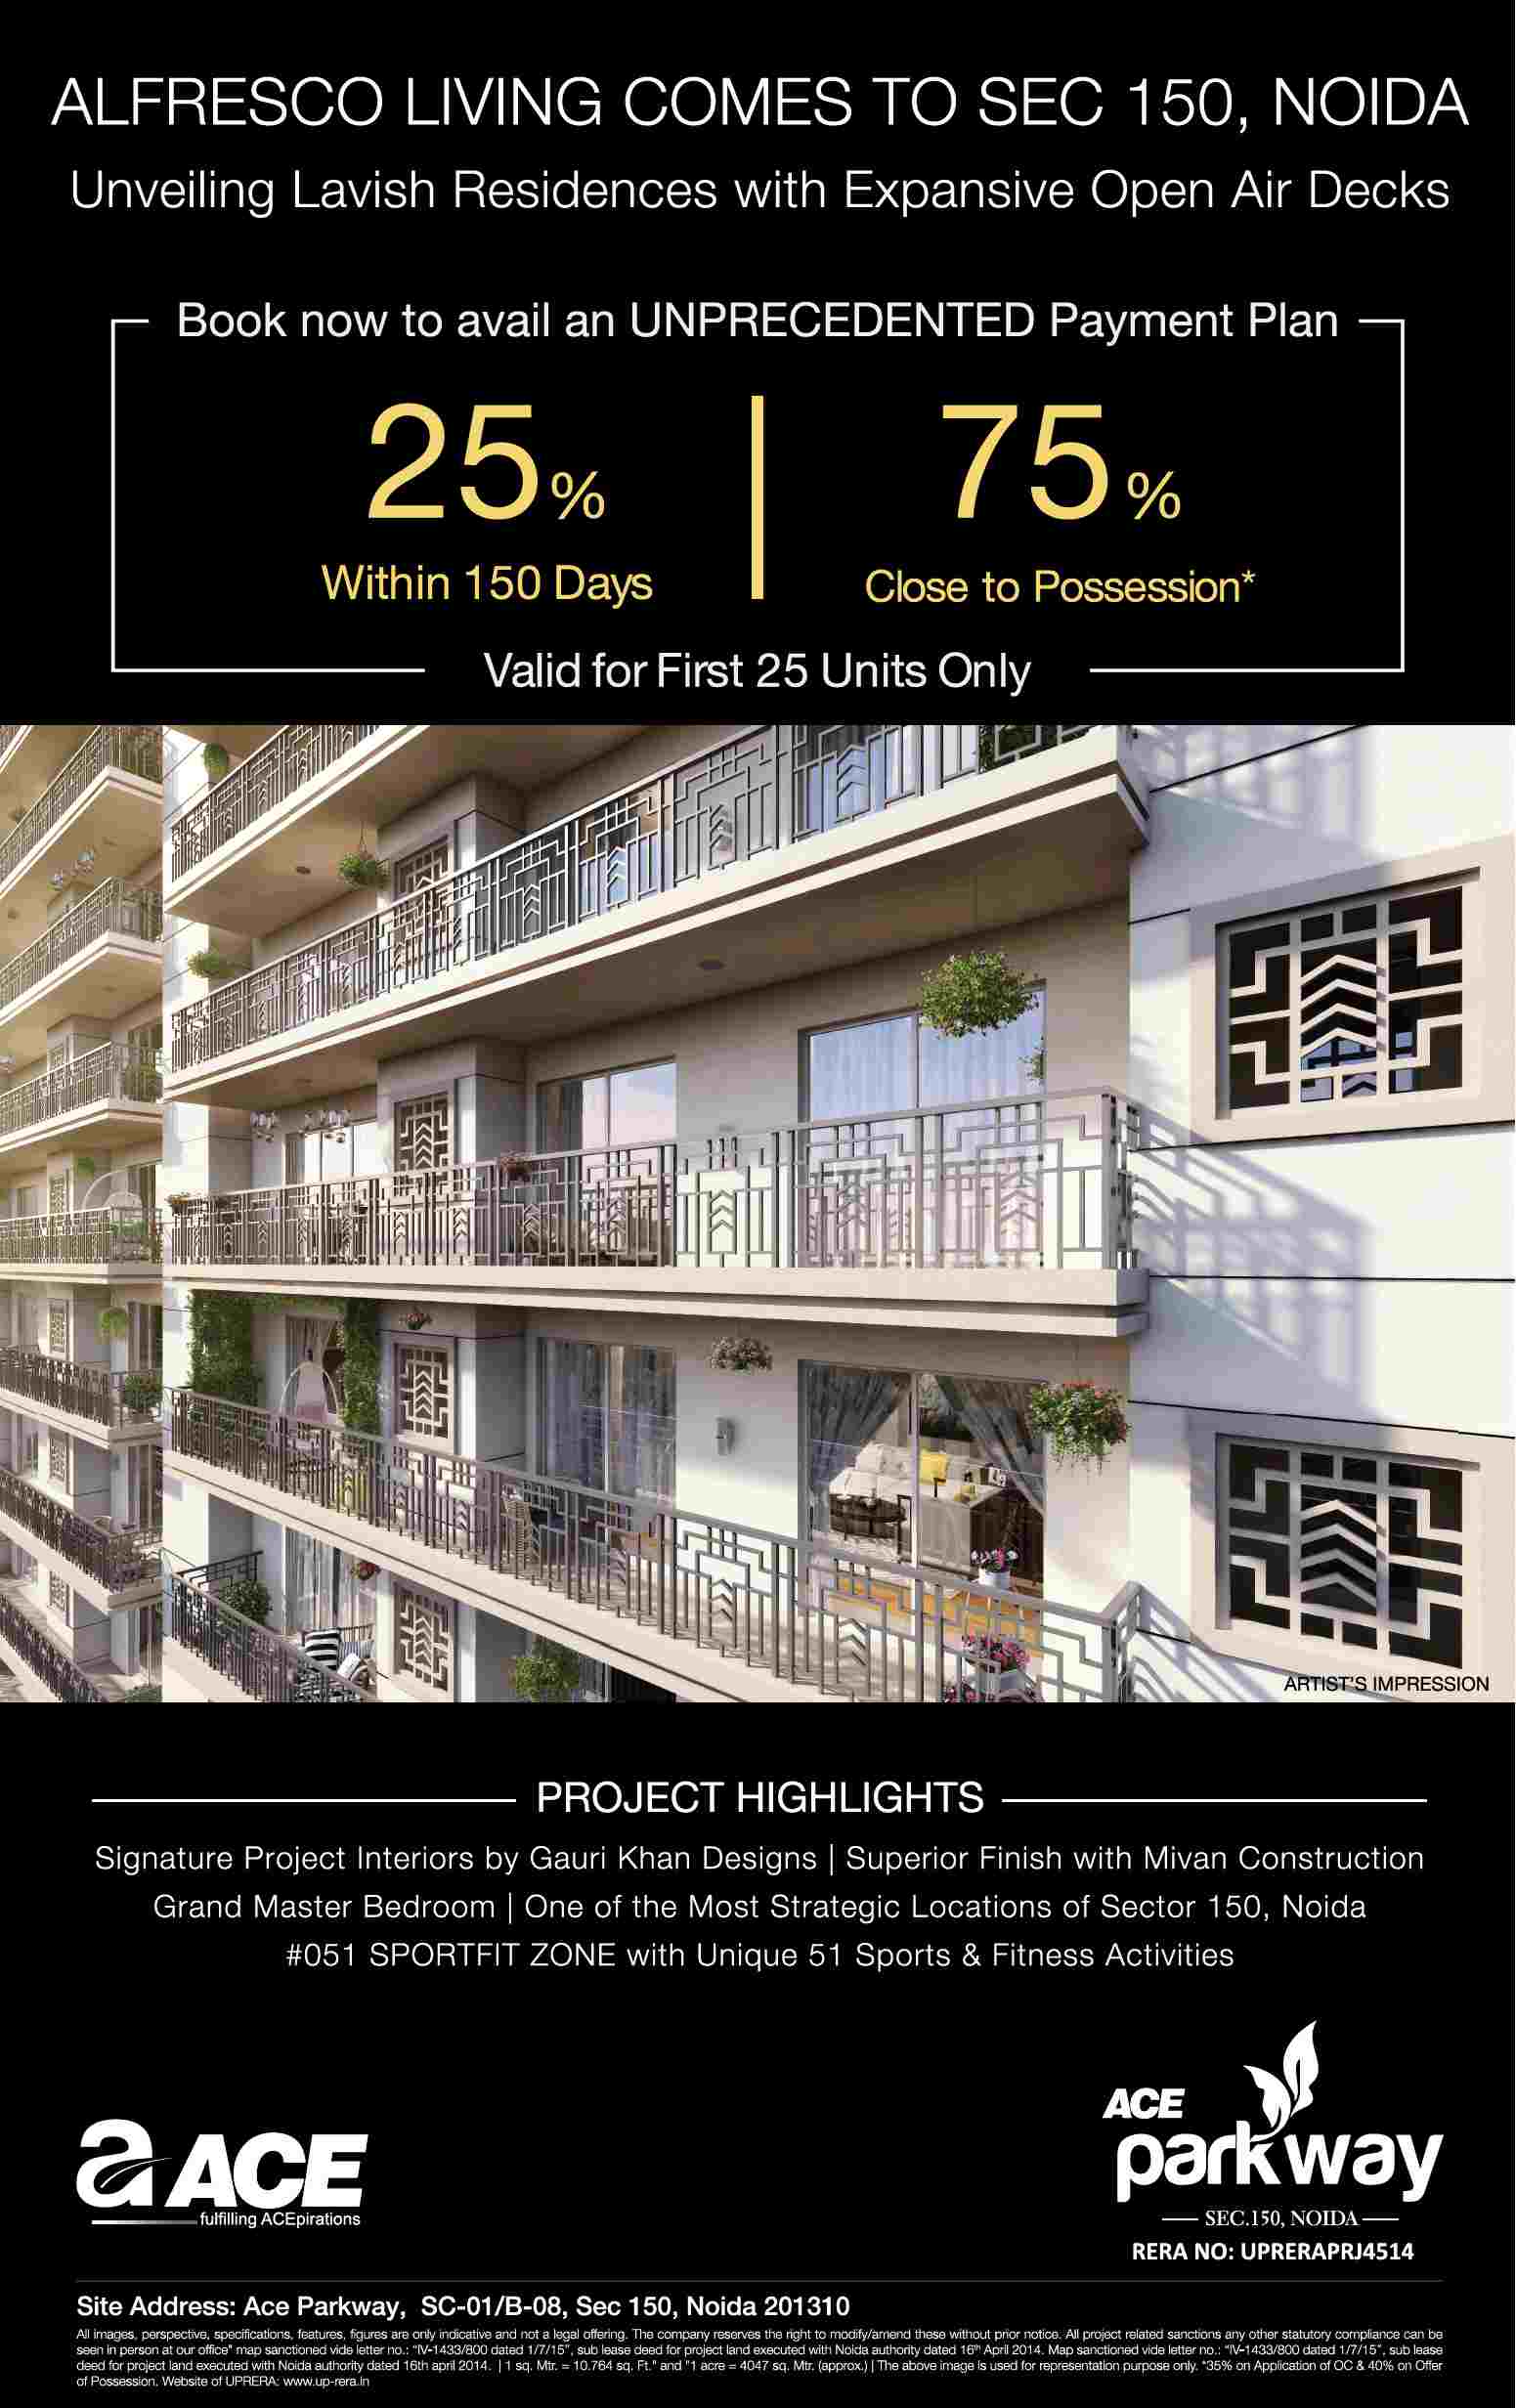 Book now & avail an unprecedented payment plan at Ace Parkway in Noida